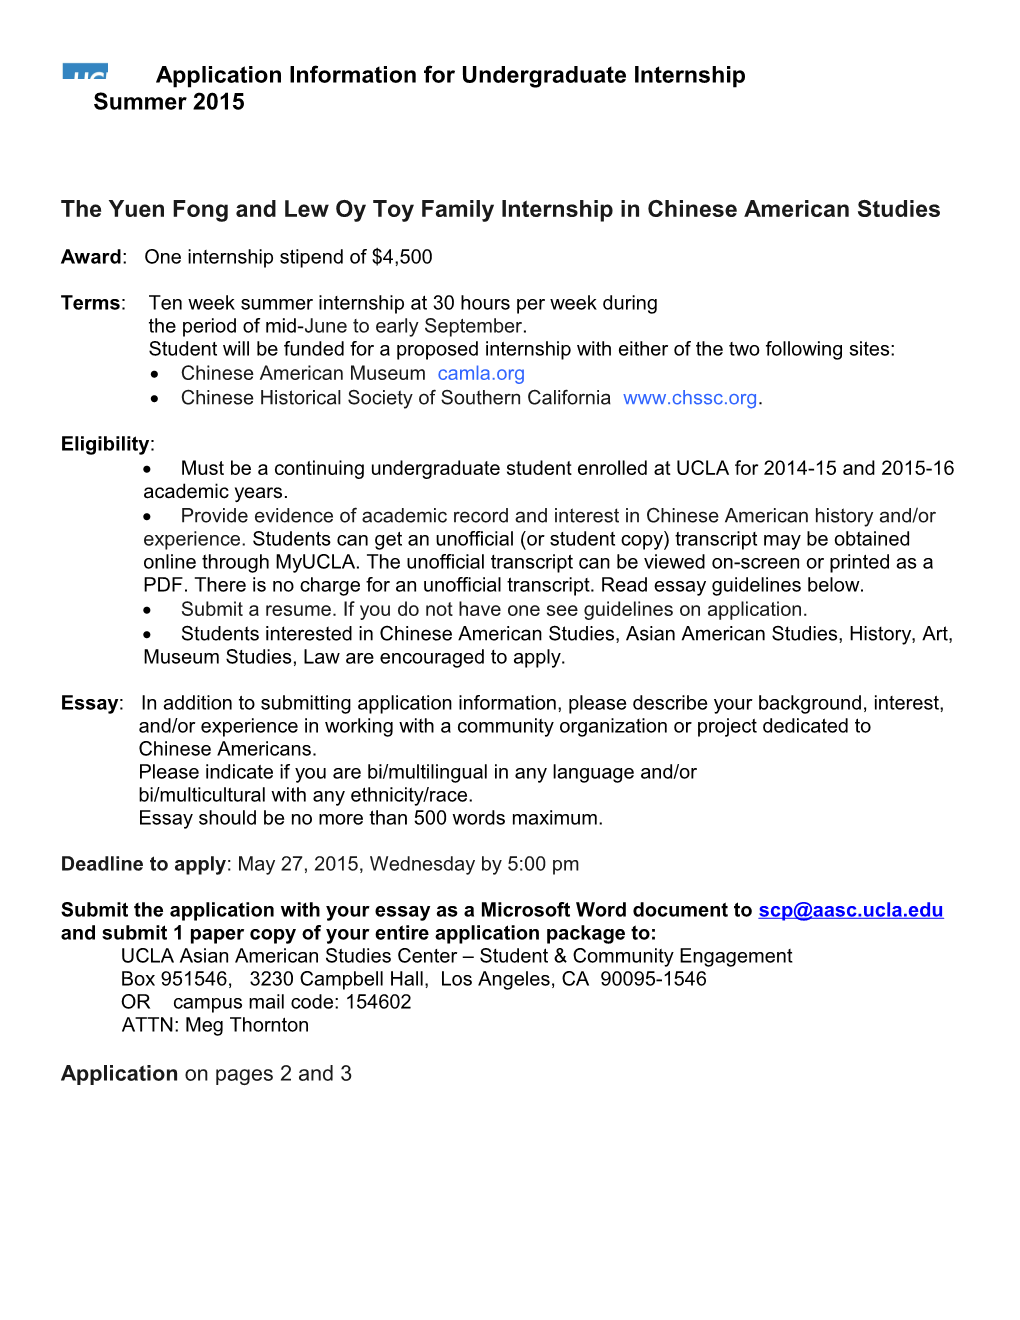 The Yuen Fong and Lew Oy Toy Family Internship in Chinese American Studies